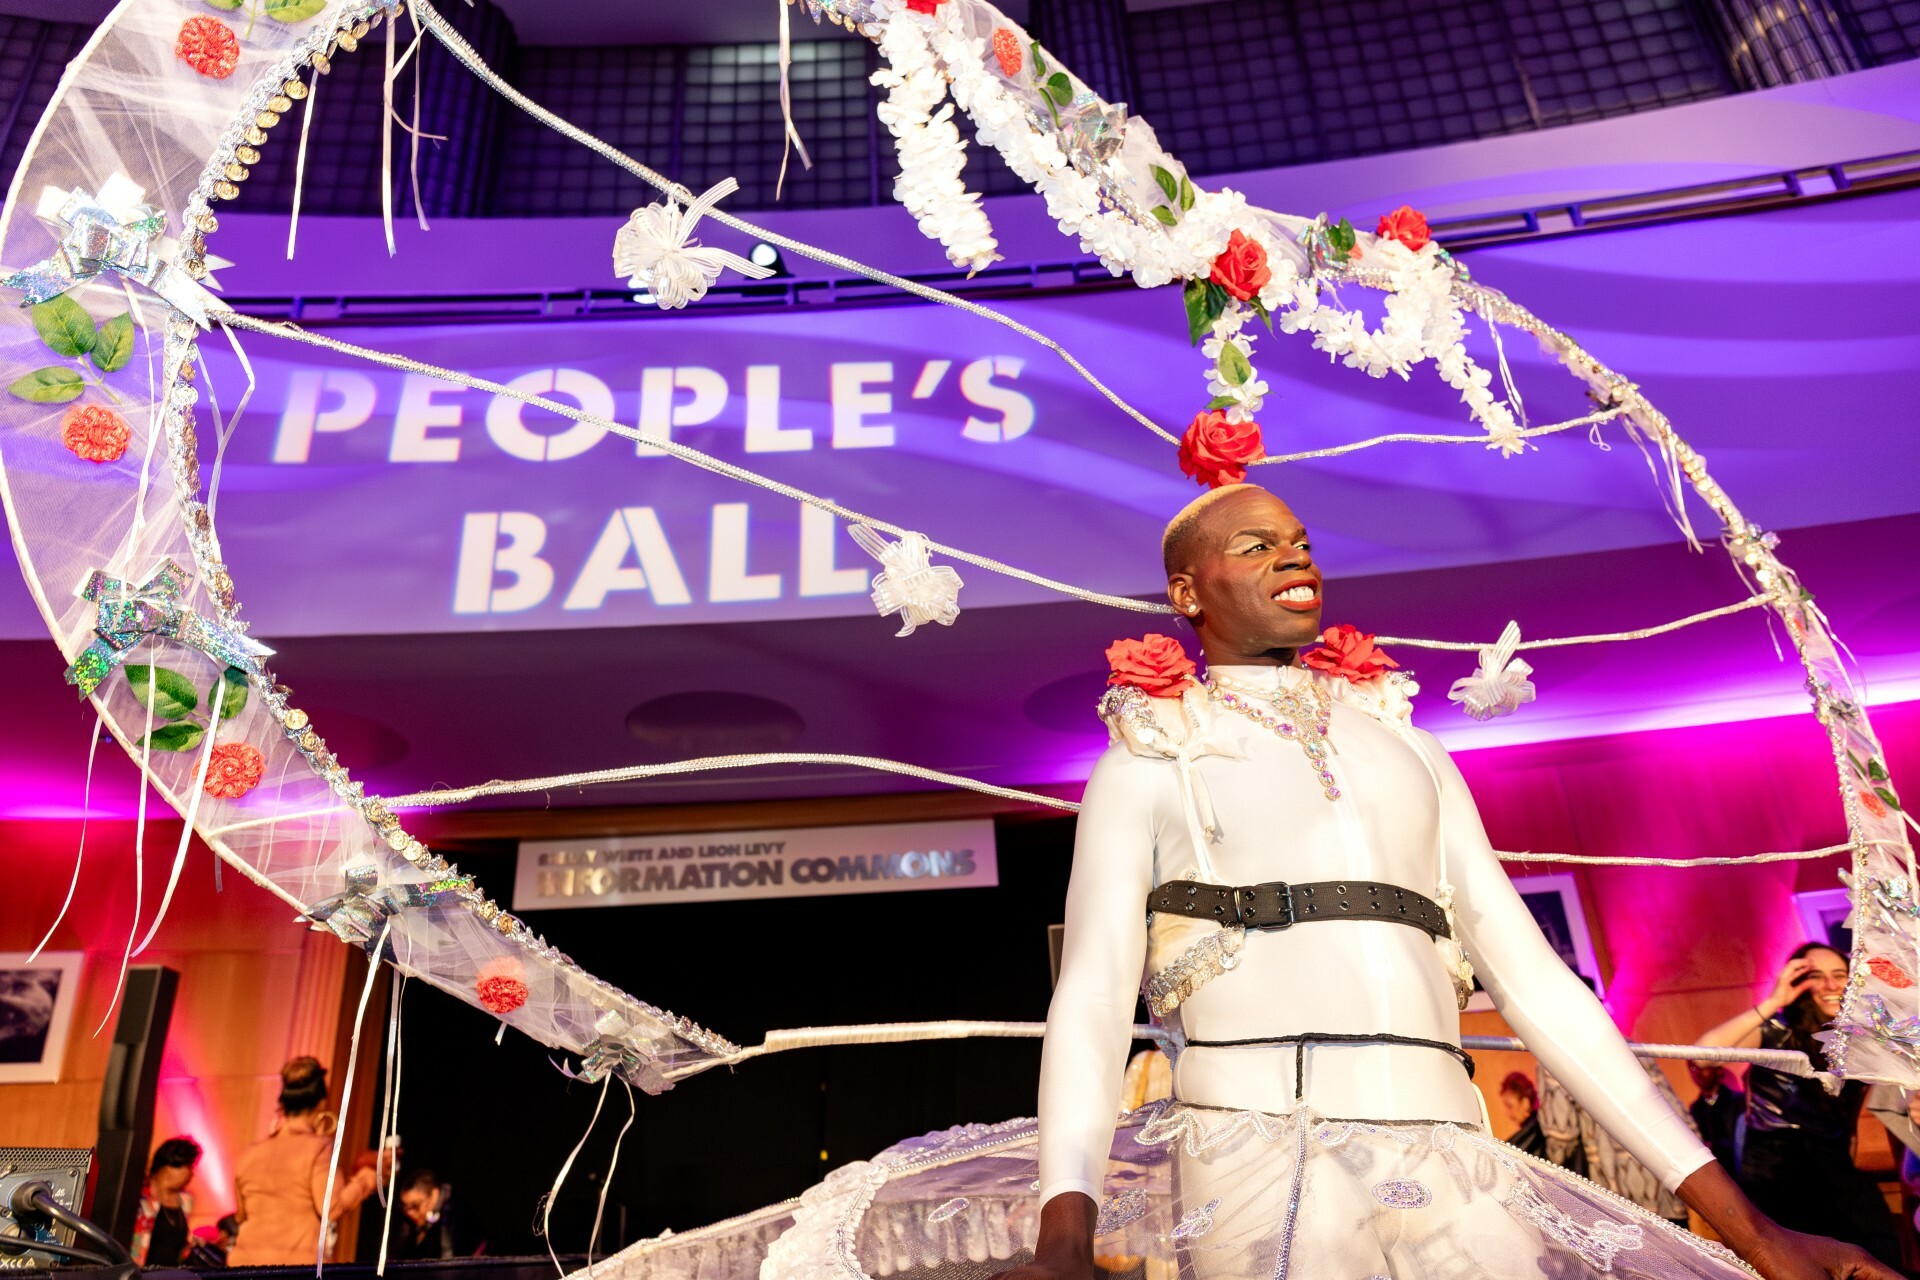 Brooklyn Public Library’s people’s ball